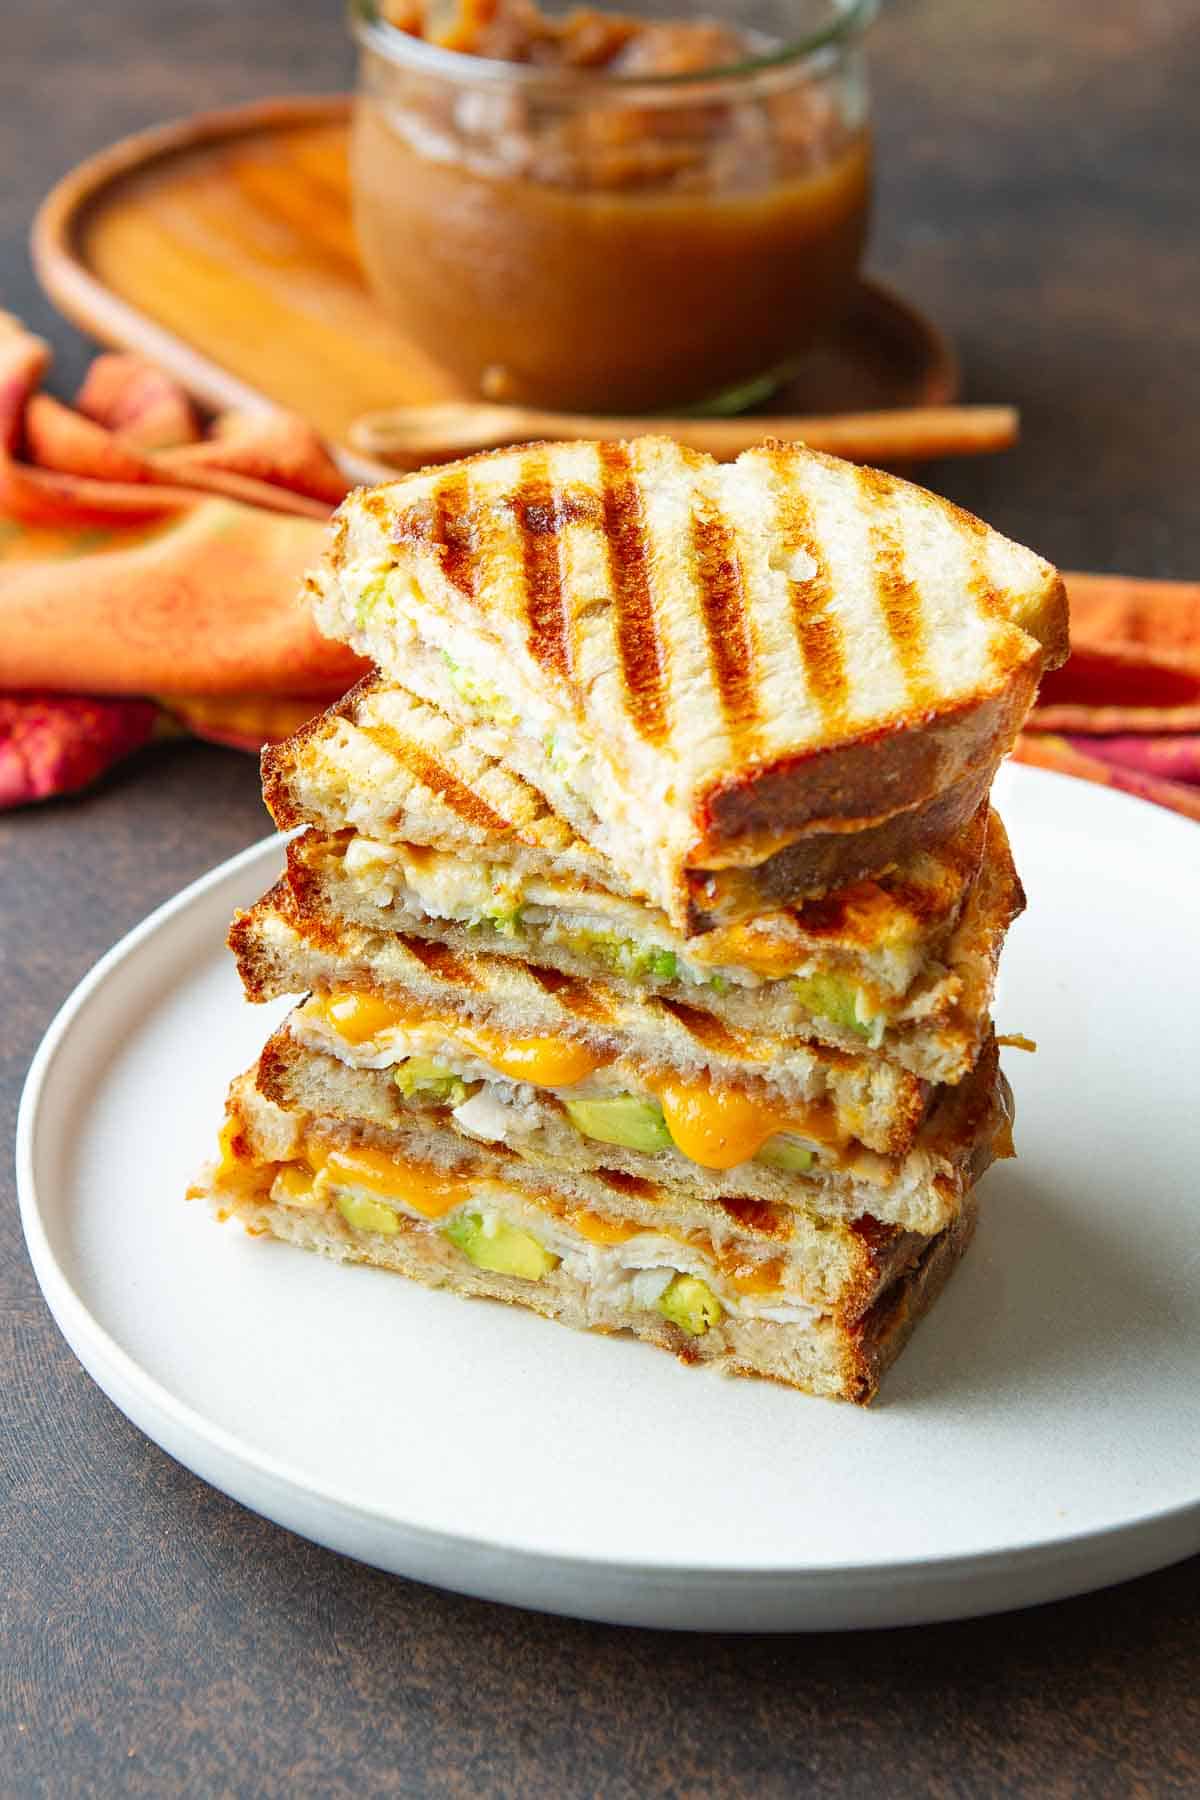 Two grilled cheese sandwiches with turkey and avocado on a white plate.